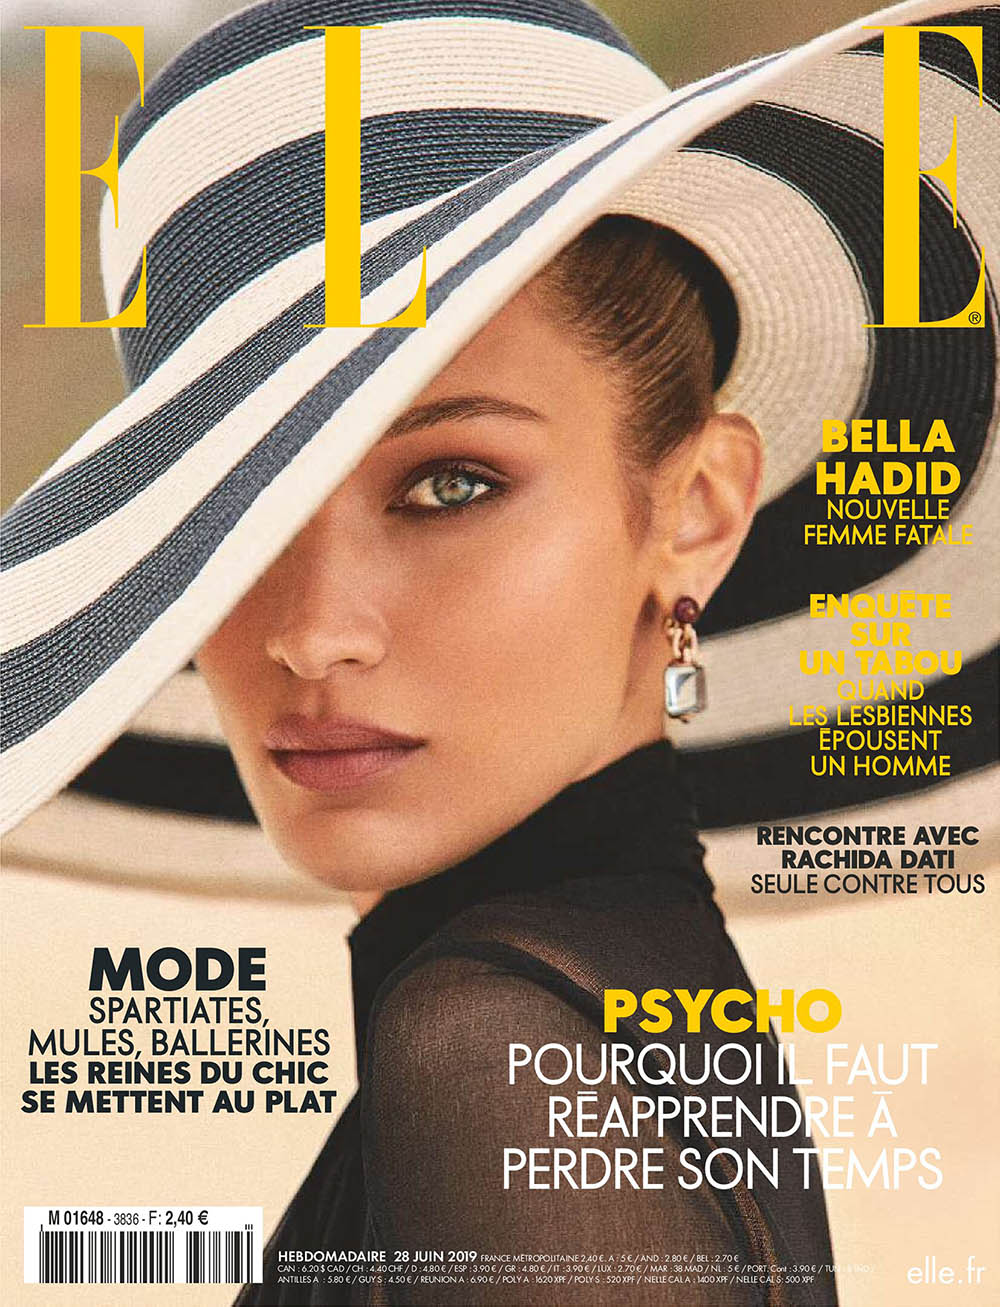 Bella Hadid covers Elle France June 28th, 2019 by Zoey Grossman